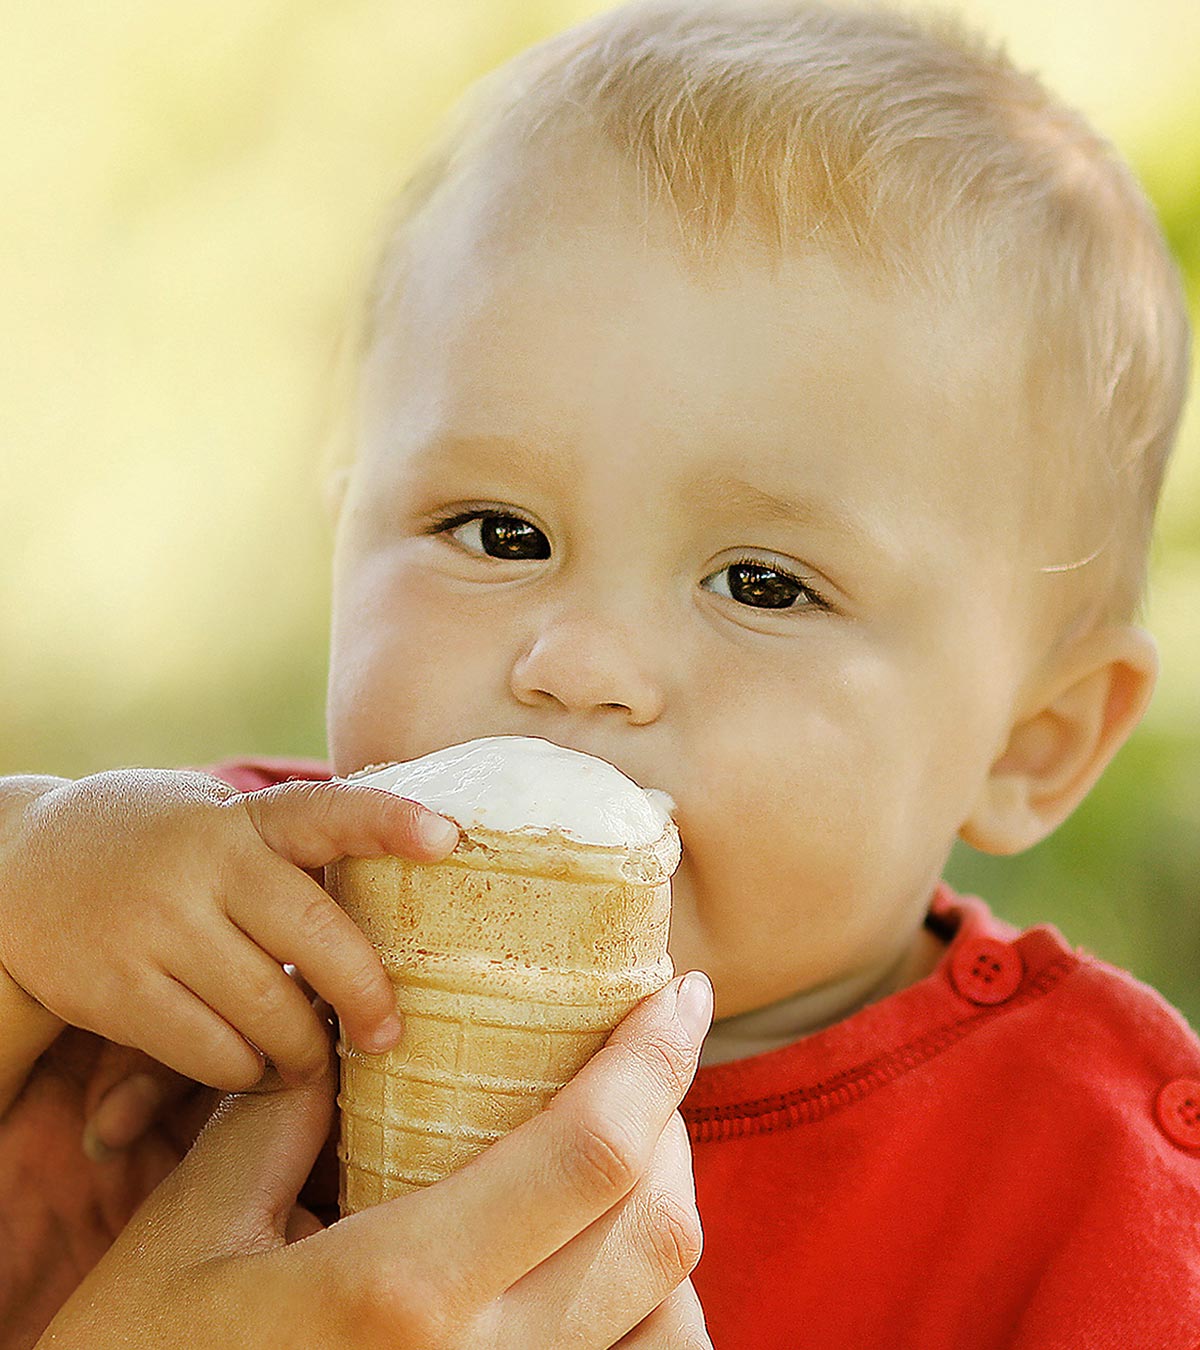 Important Things You Must Know When Giving Ice Cream To A Baby